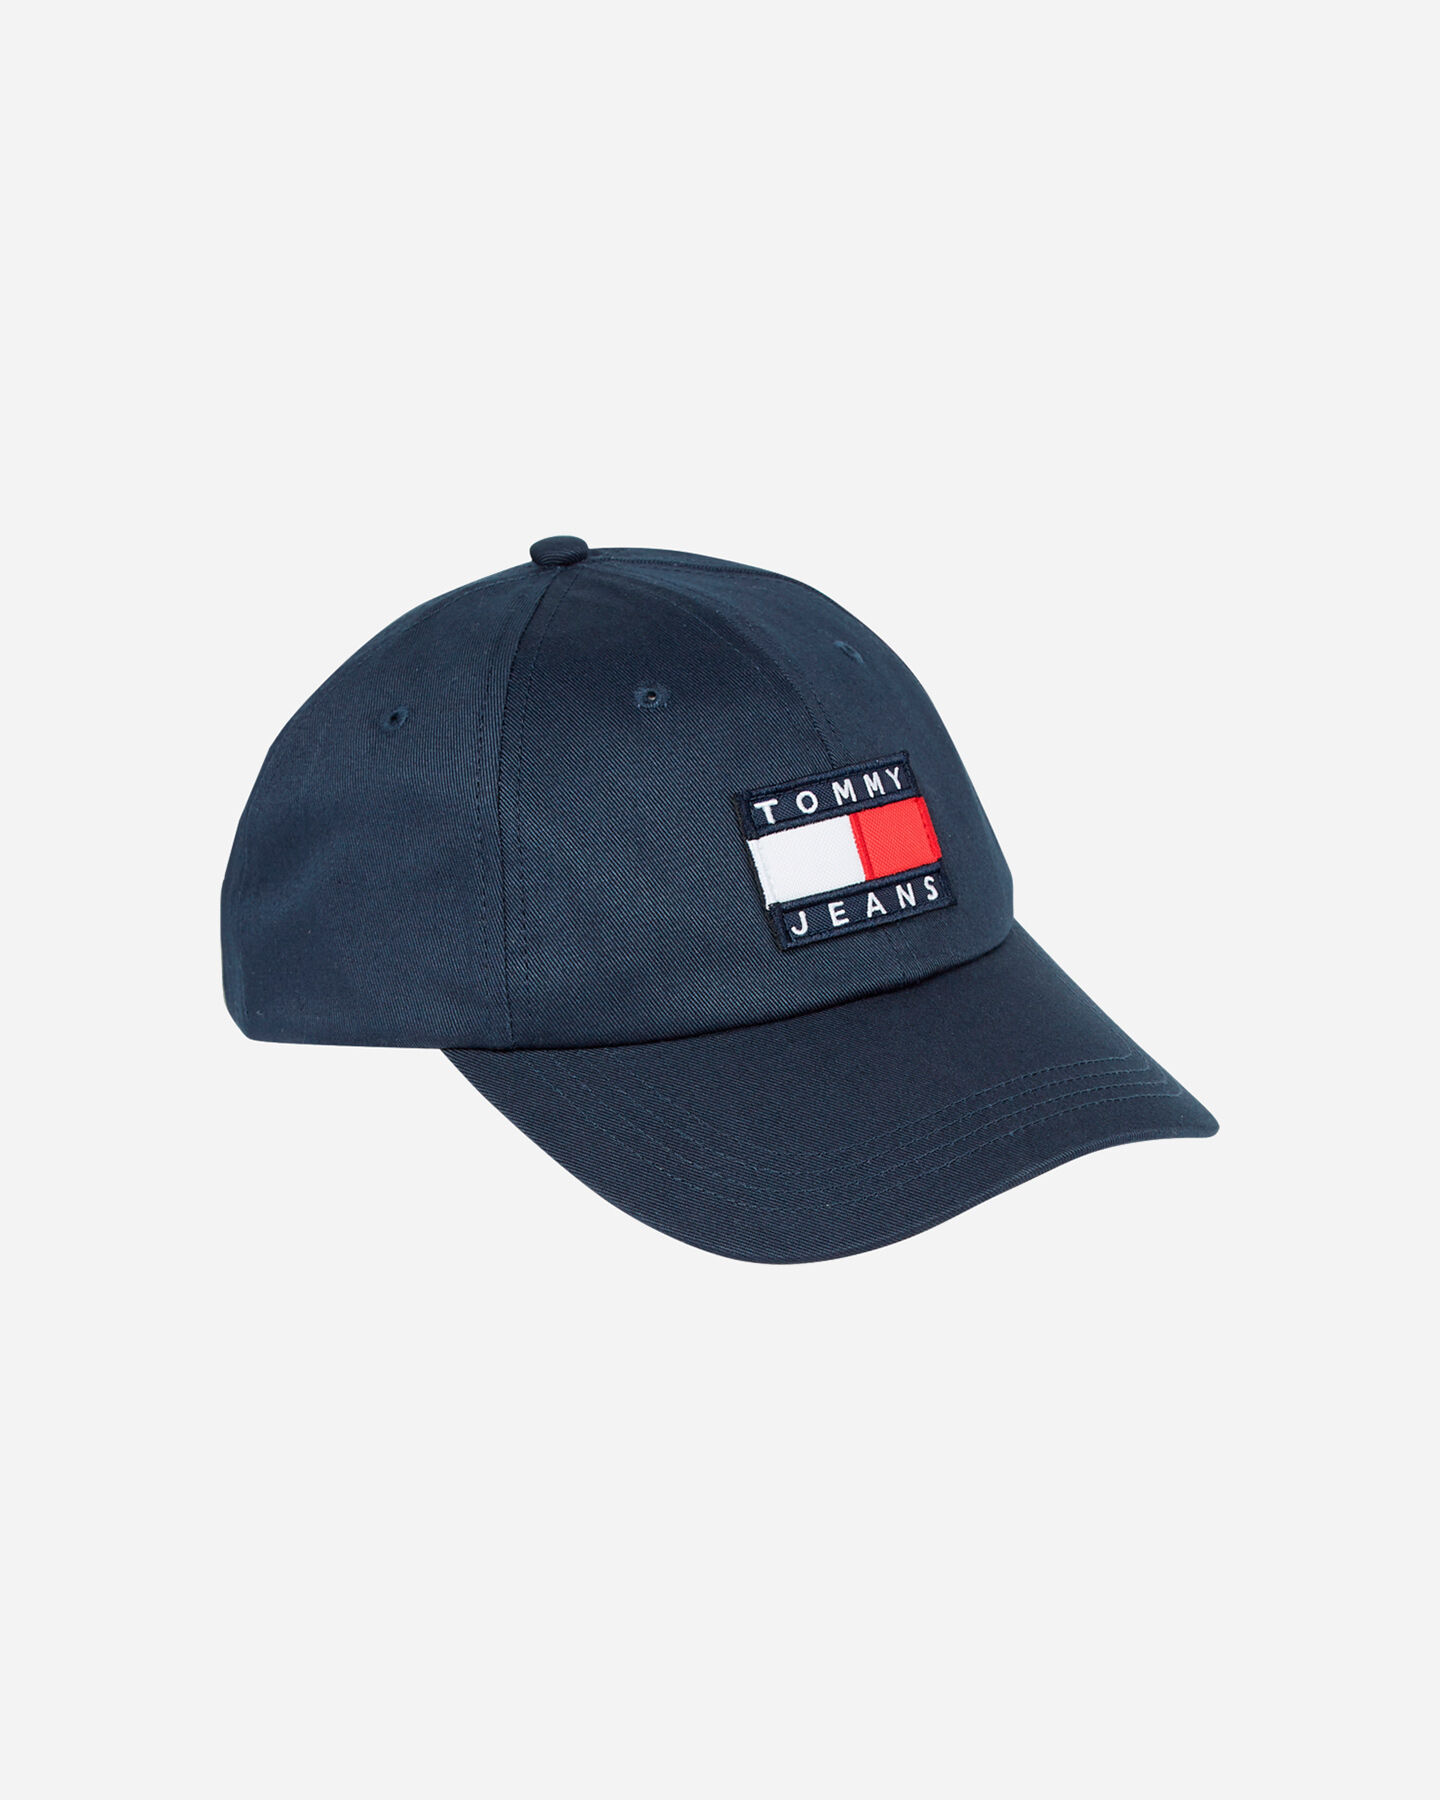  Cappellino TOMMY HILFIGER BIG FLAG HERITAGE M S4105862|C87|OS scatto 0